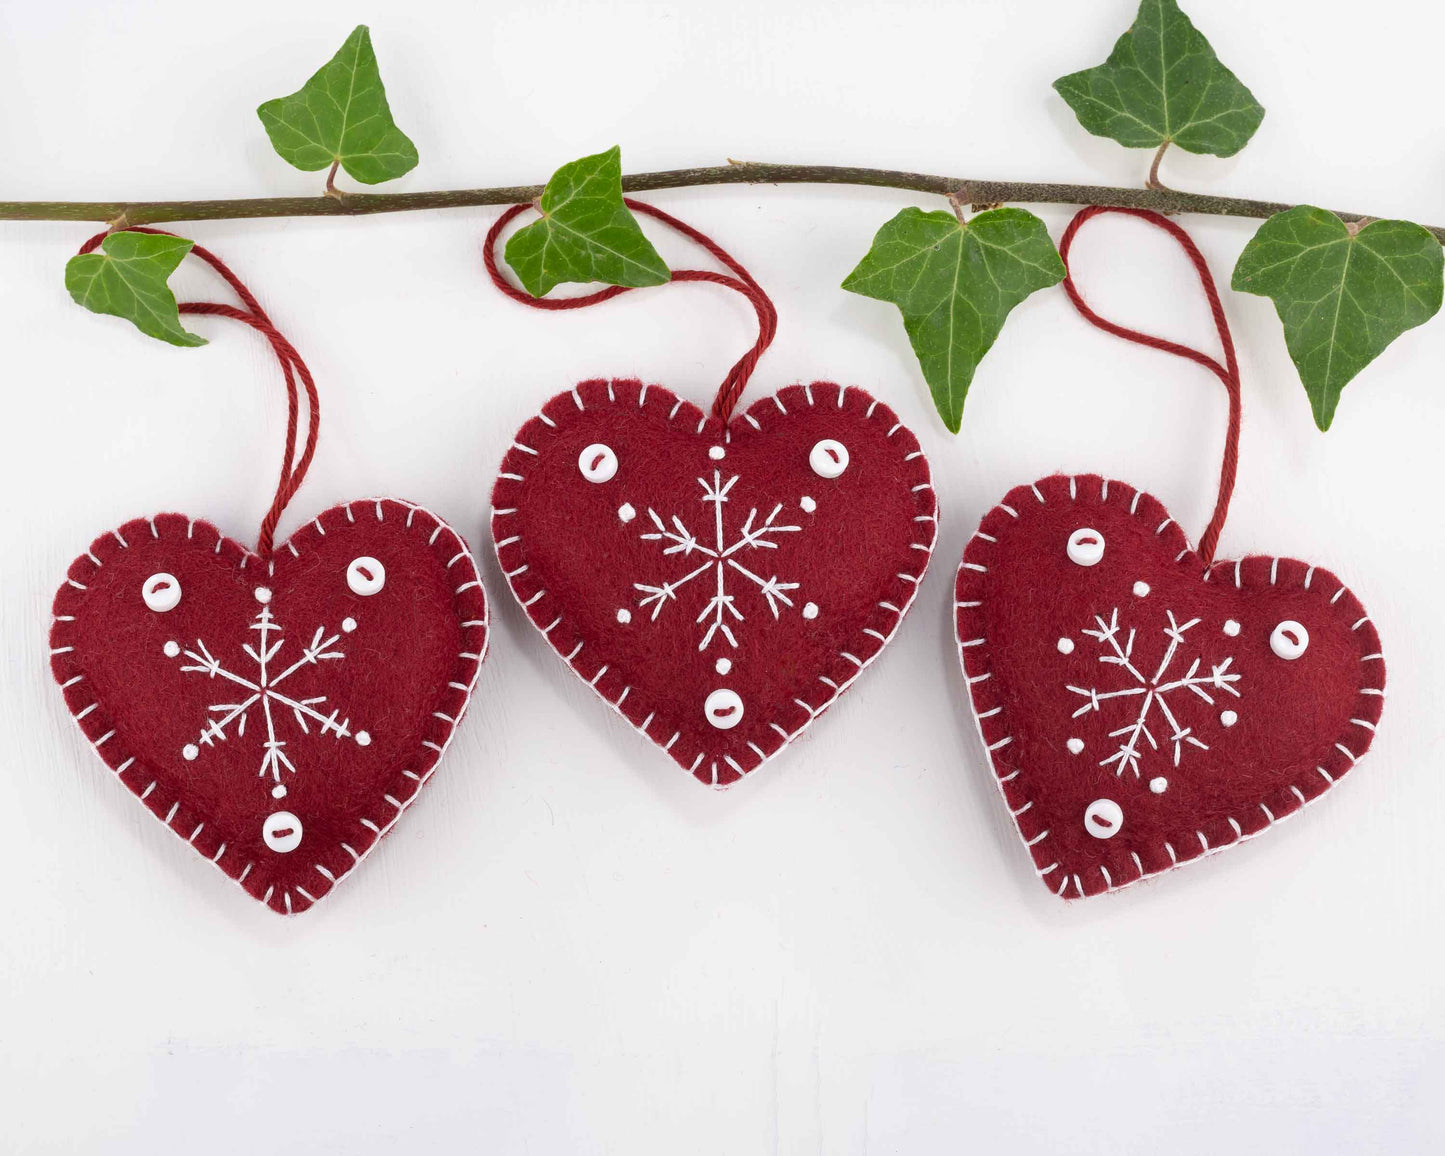 Red and White Snowflake Heart Christmas Ornaments